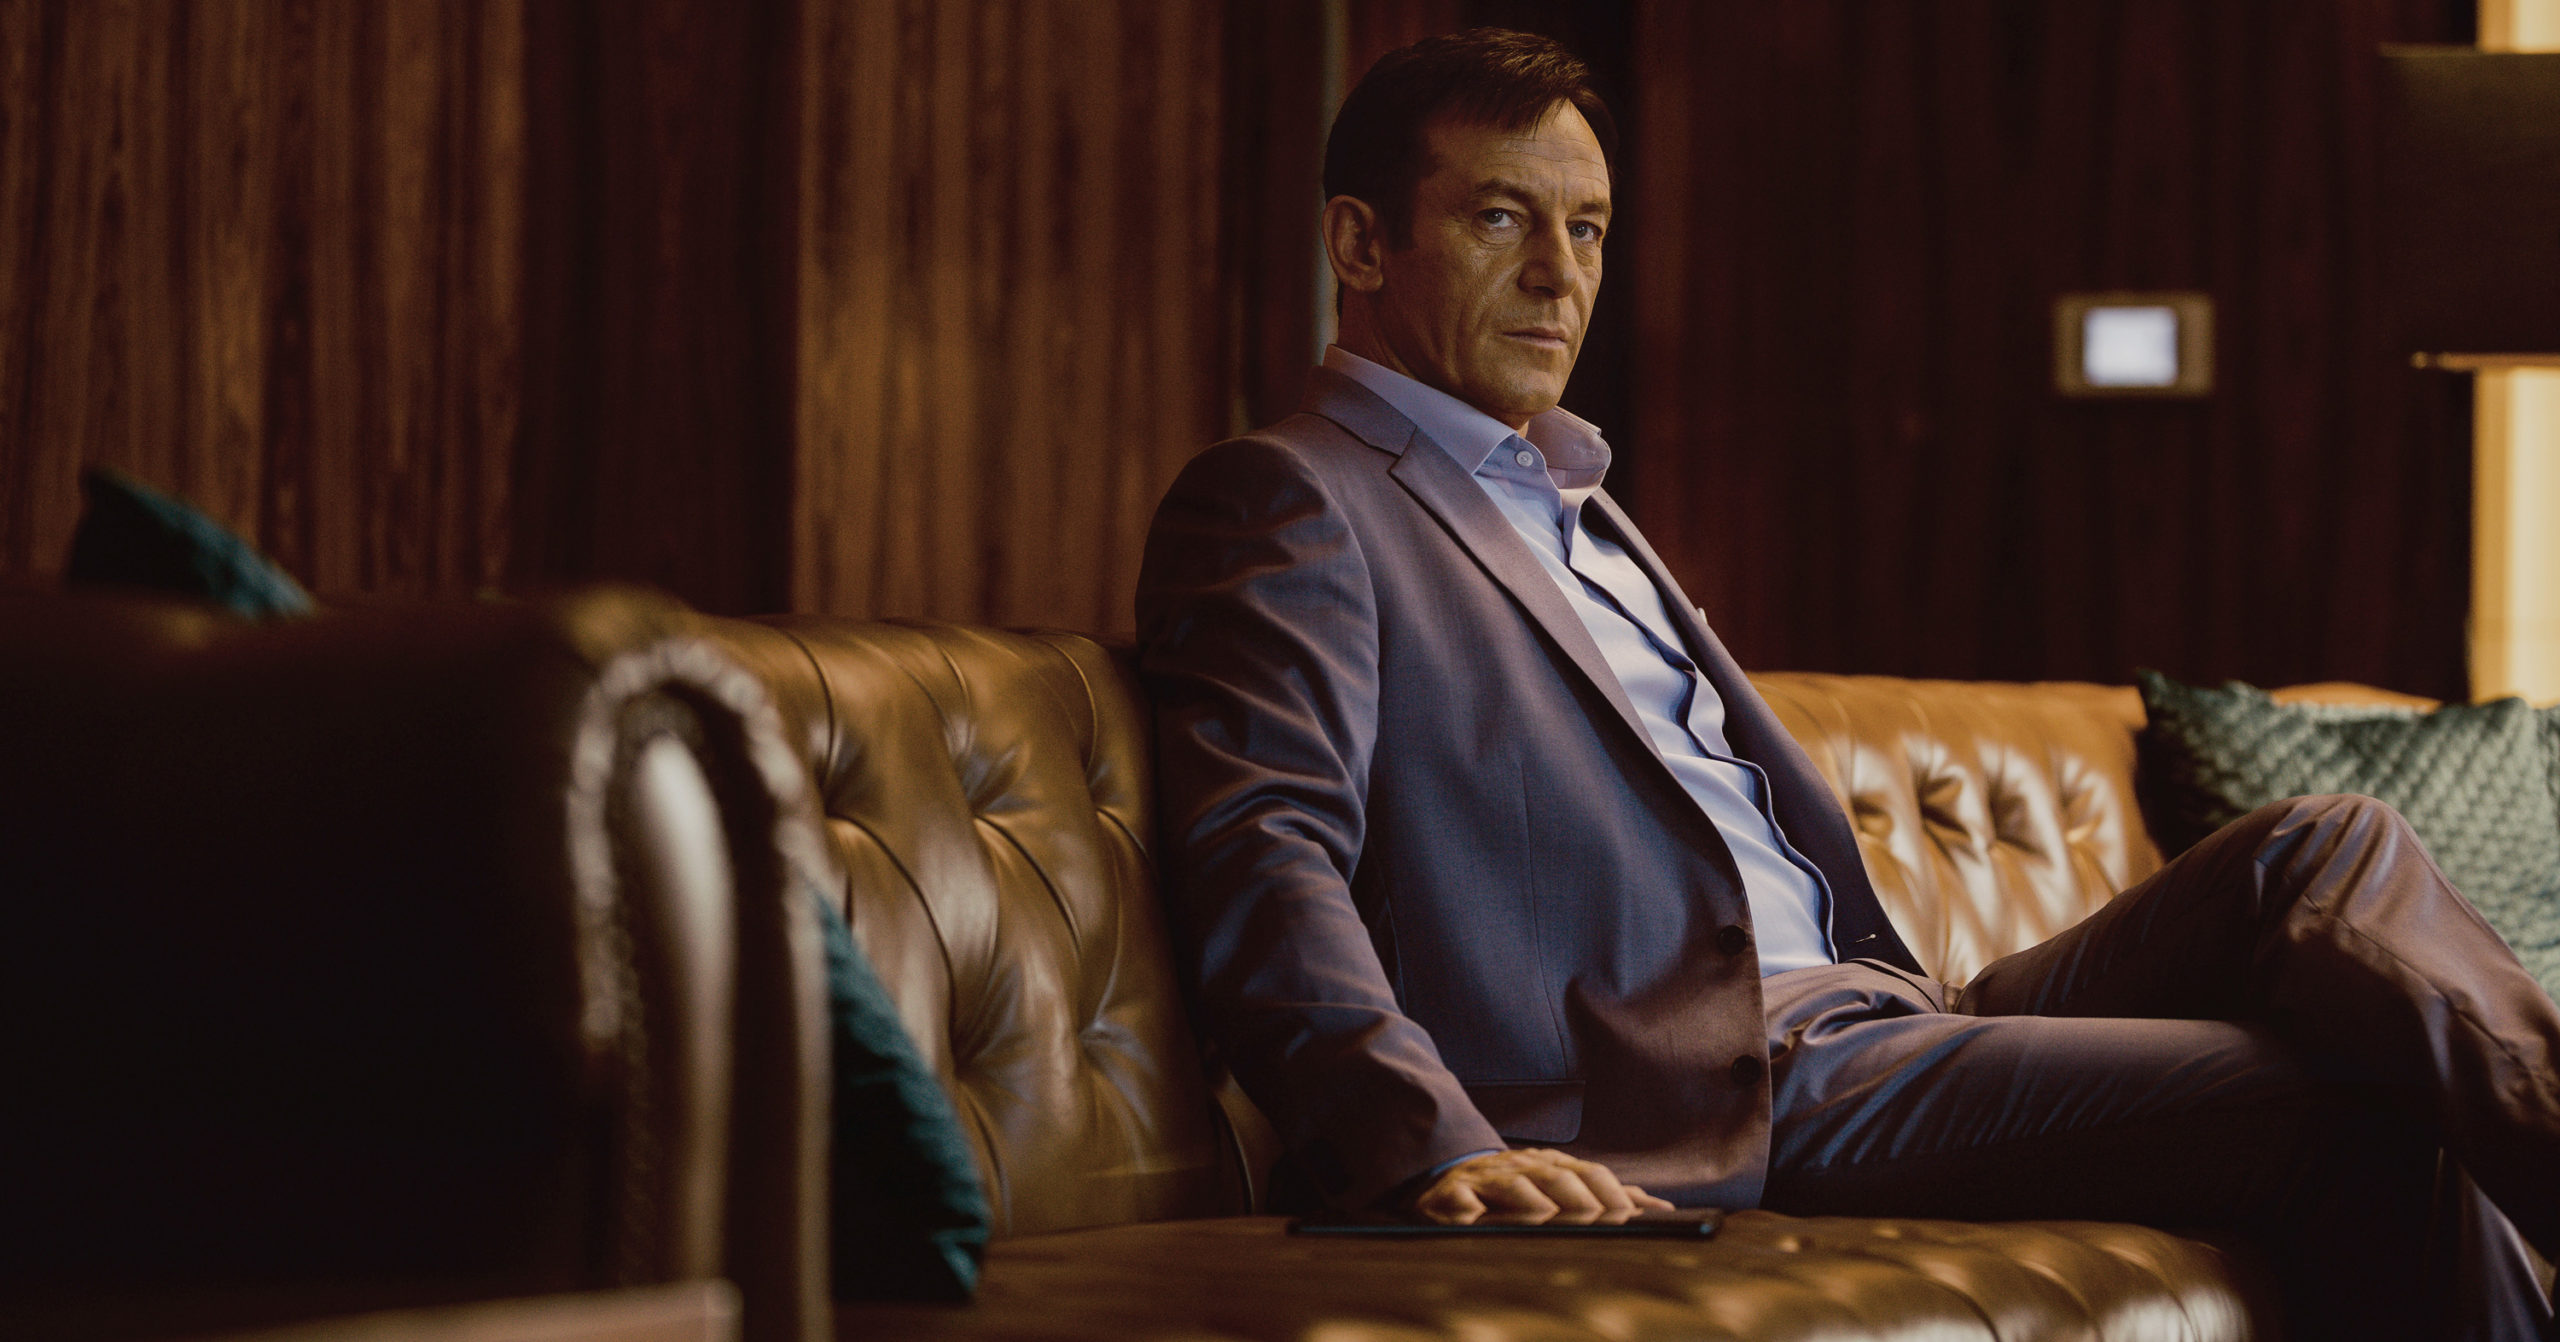 Jason Isaacs Return To Star Wars – Why Is Actor So Scared Of Lucasfilm NDA?